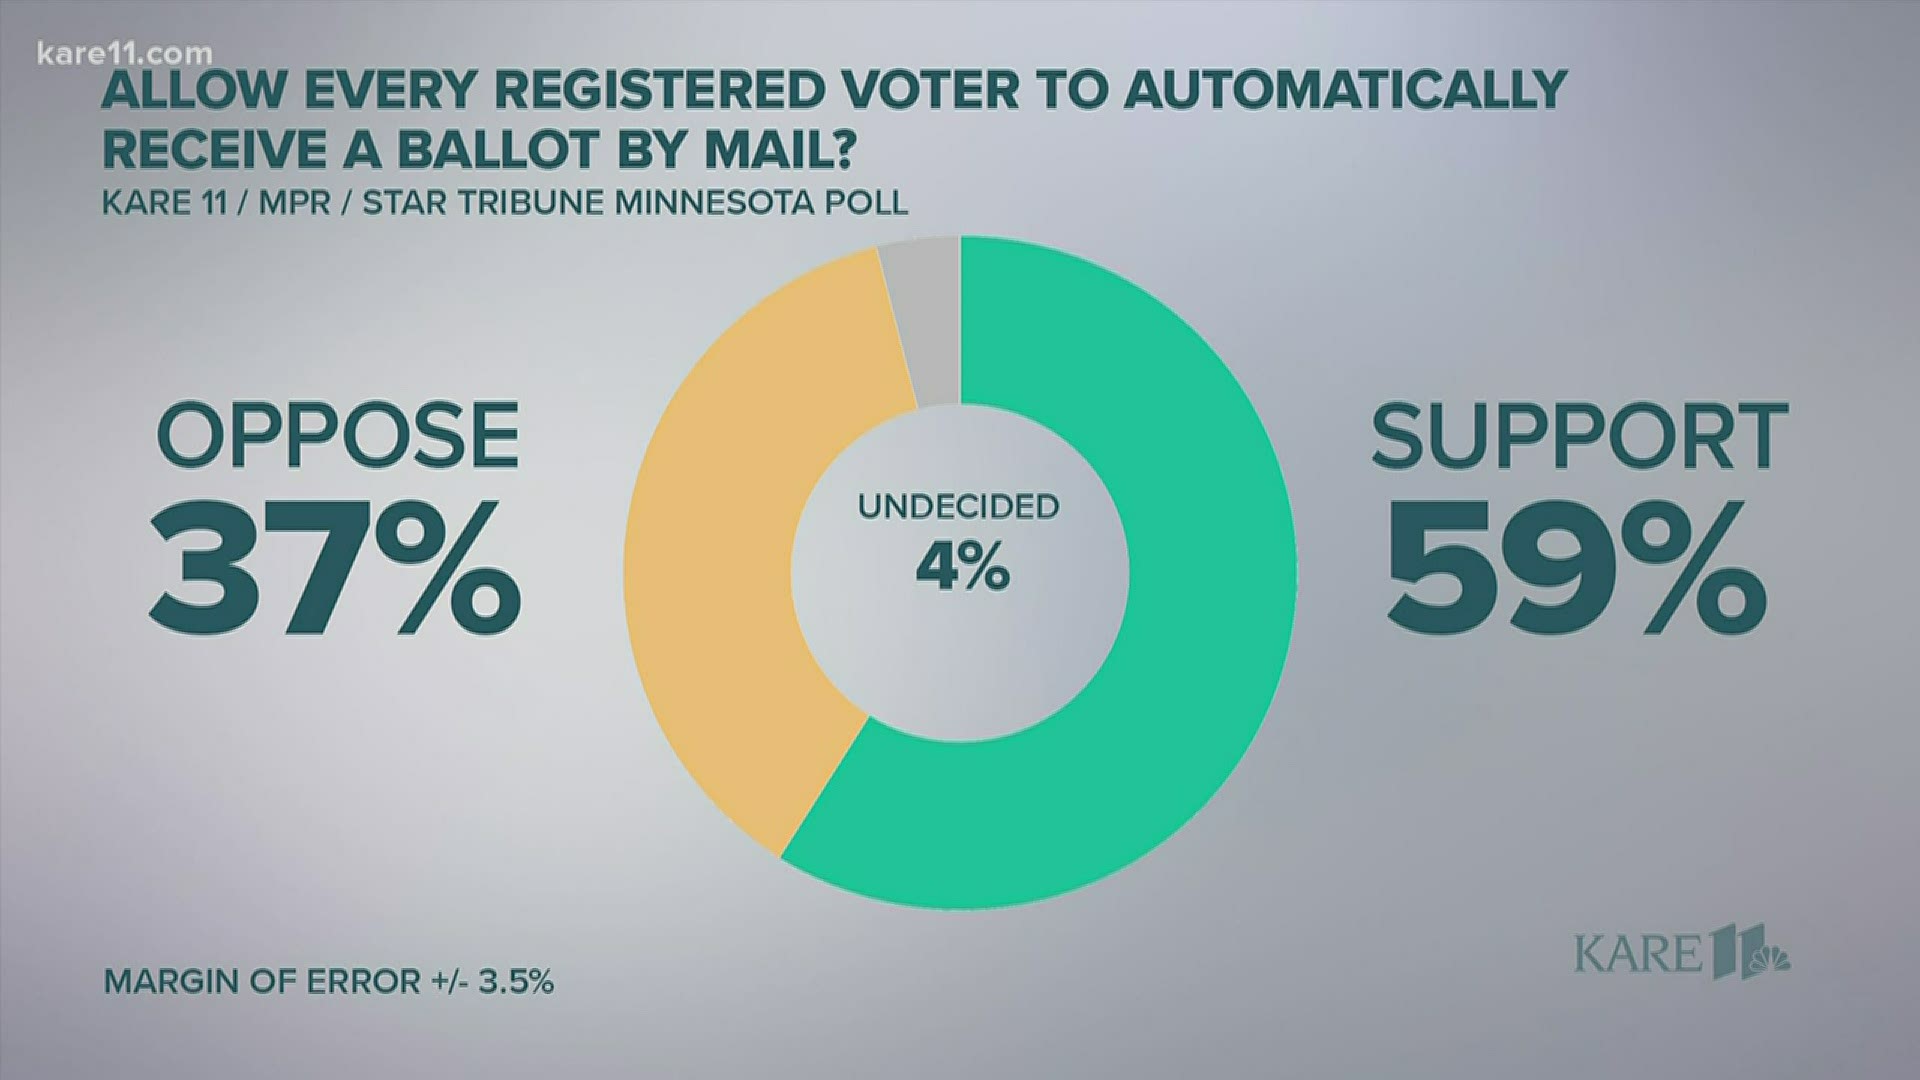 A new poll from KARE, MPR News & the Star Tribune found broad support for sending ballots to all registered voters, to make it easier to vote by mail in the pandemic